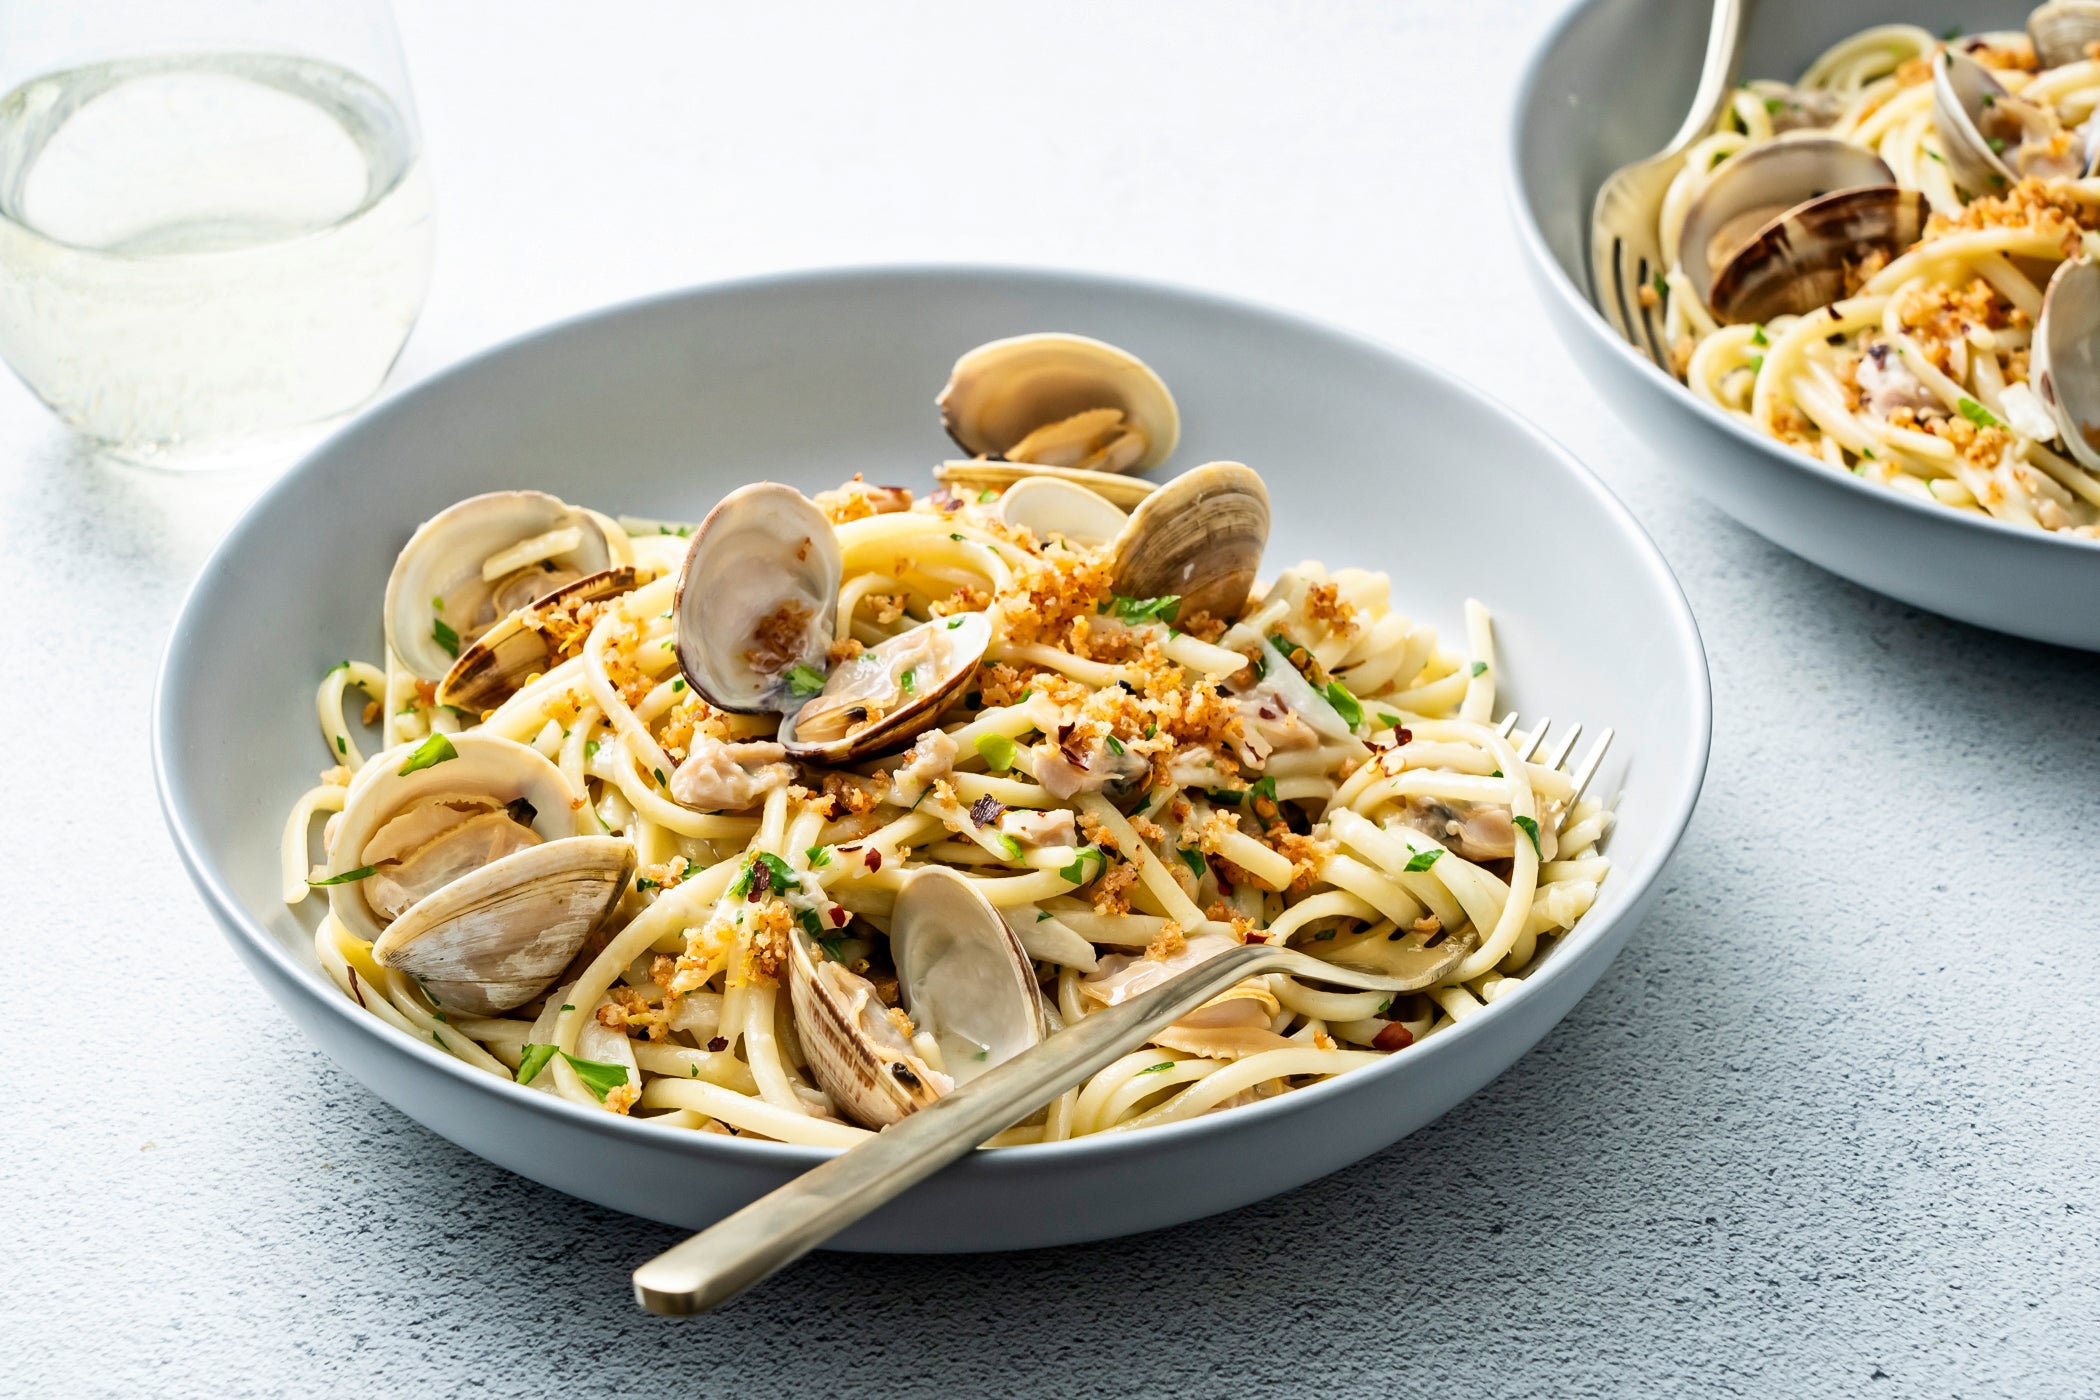 ‘In my romantic comedy, linguine with clams plays the starring role’